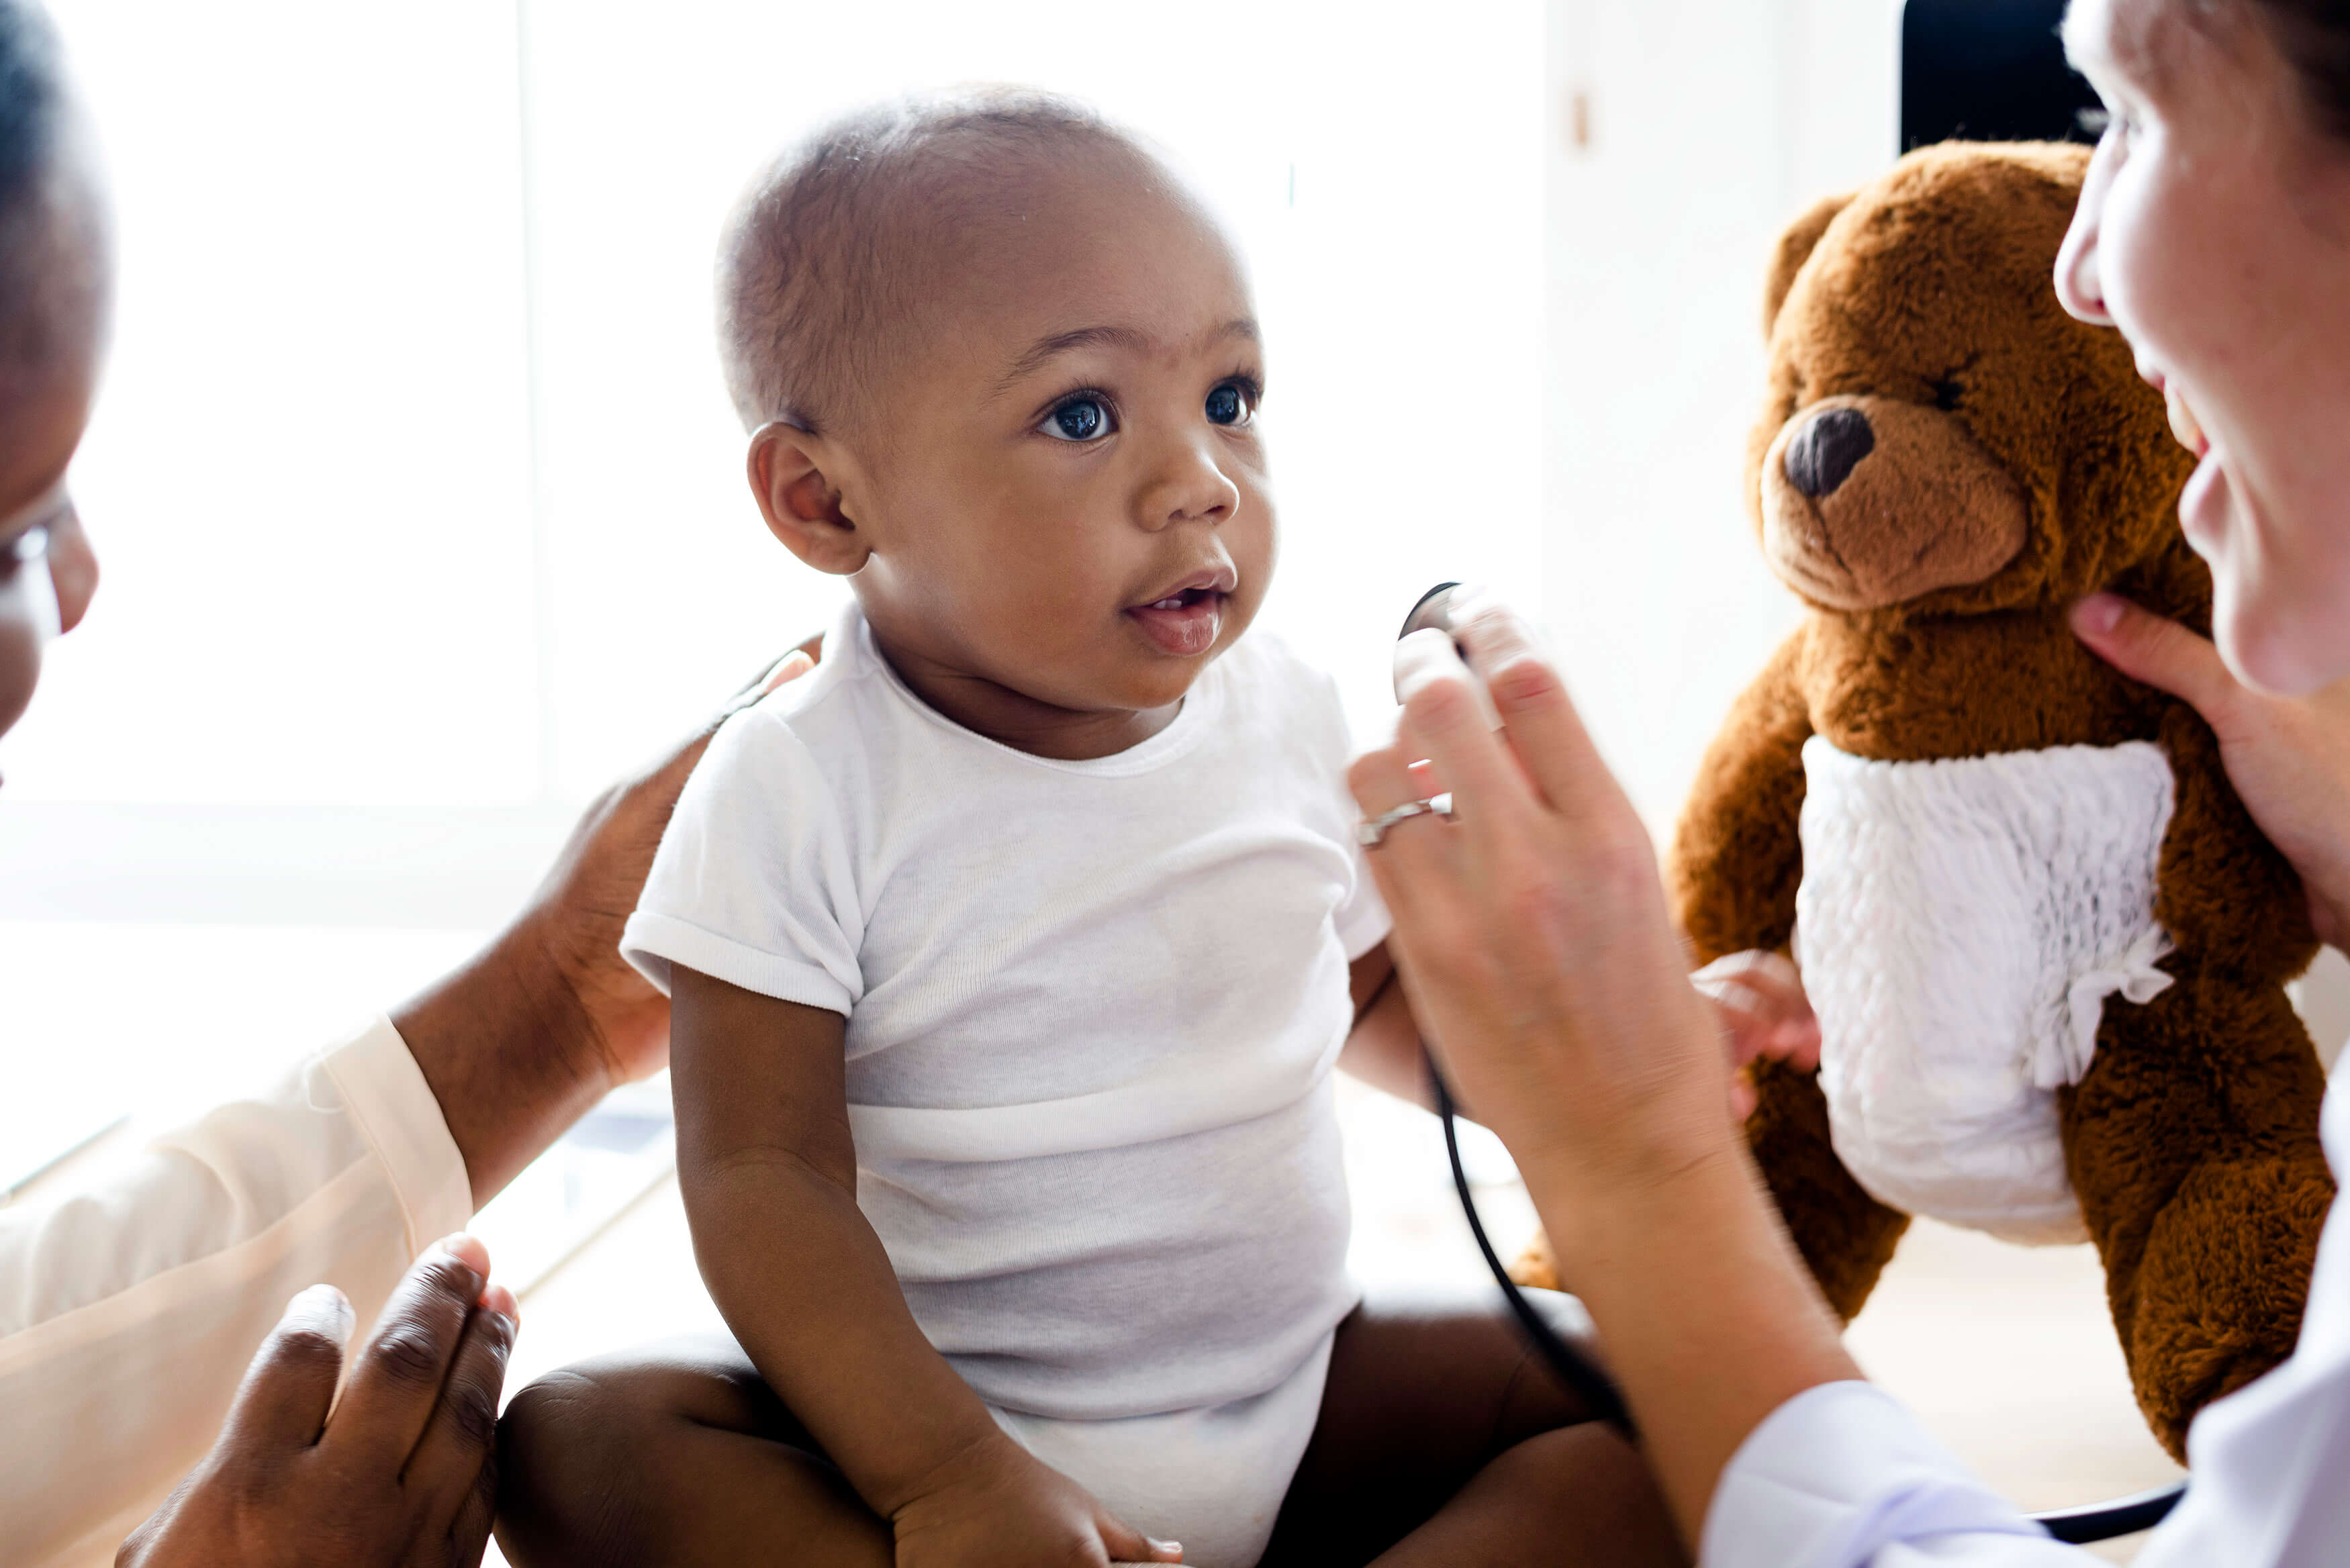 An infant getting a check up at the doctor's office